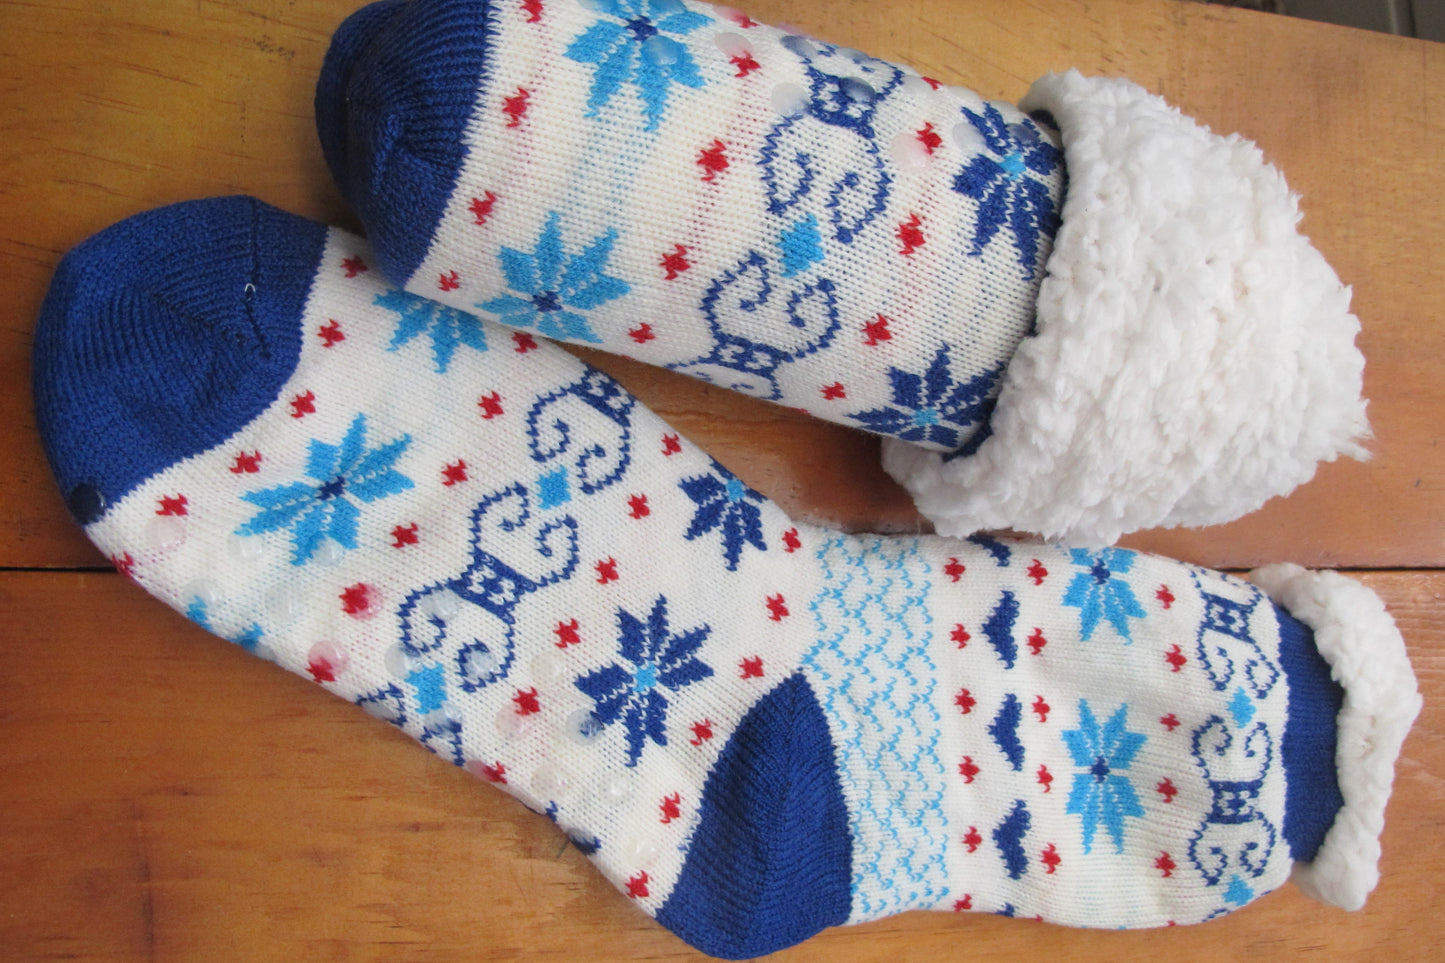 Sherpa-Lined Cabin Socks .  Blue and red color.  Snowflake/faireisle design